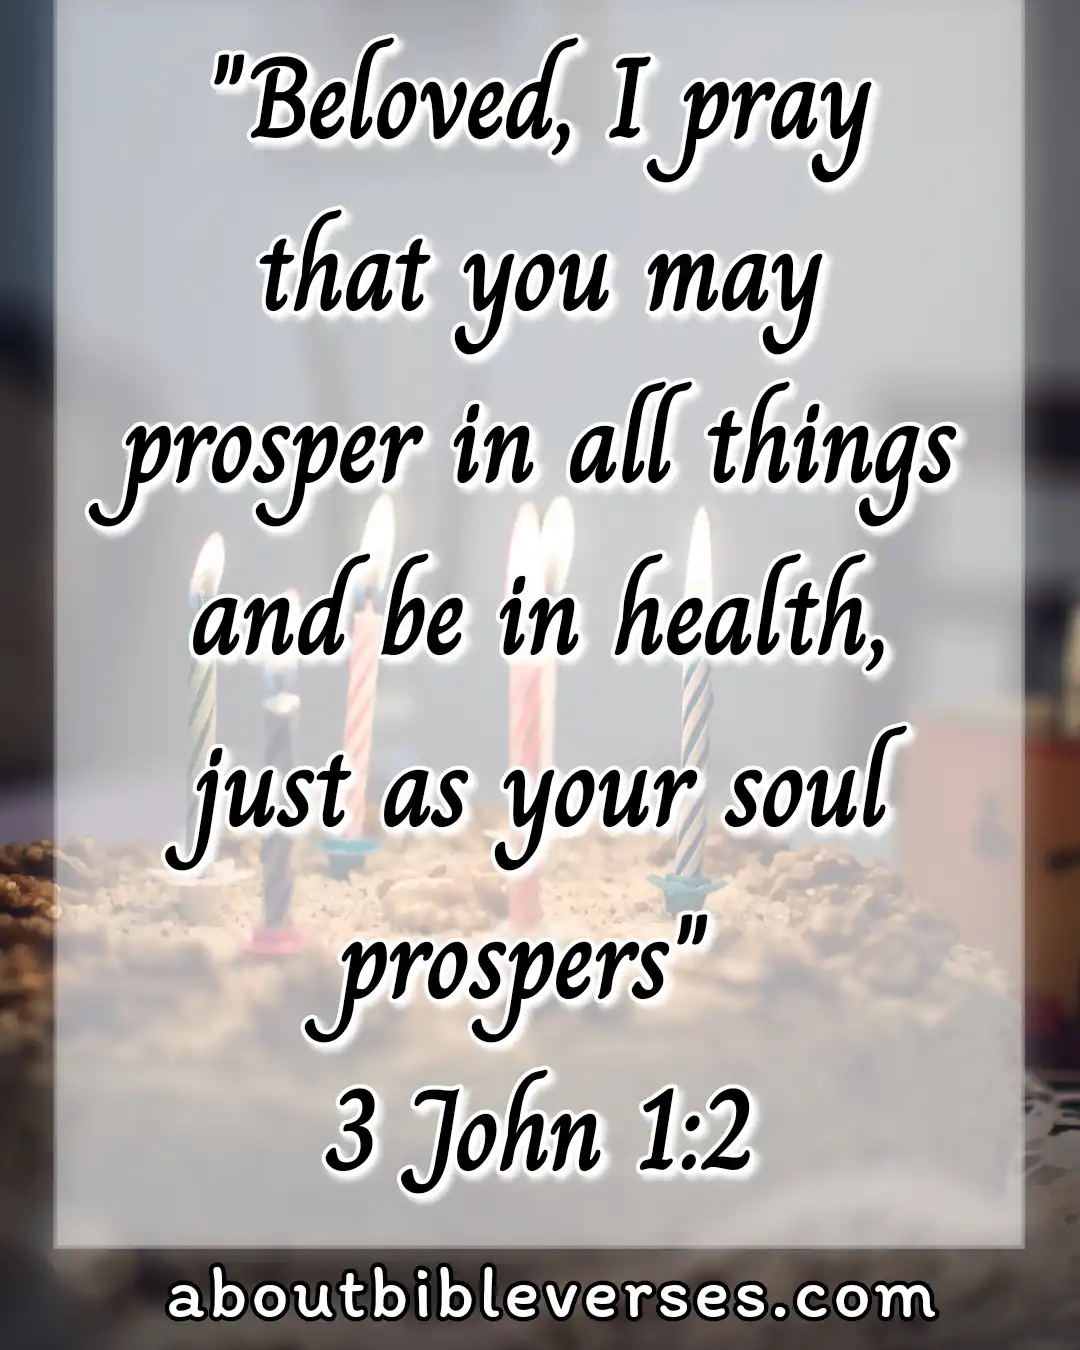 Bible Verses About Health And Wellness (3 John 1:2)